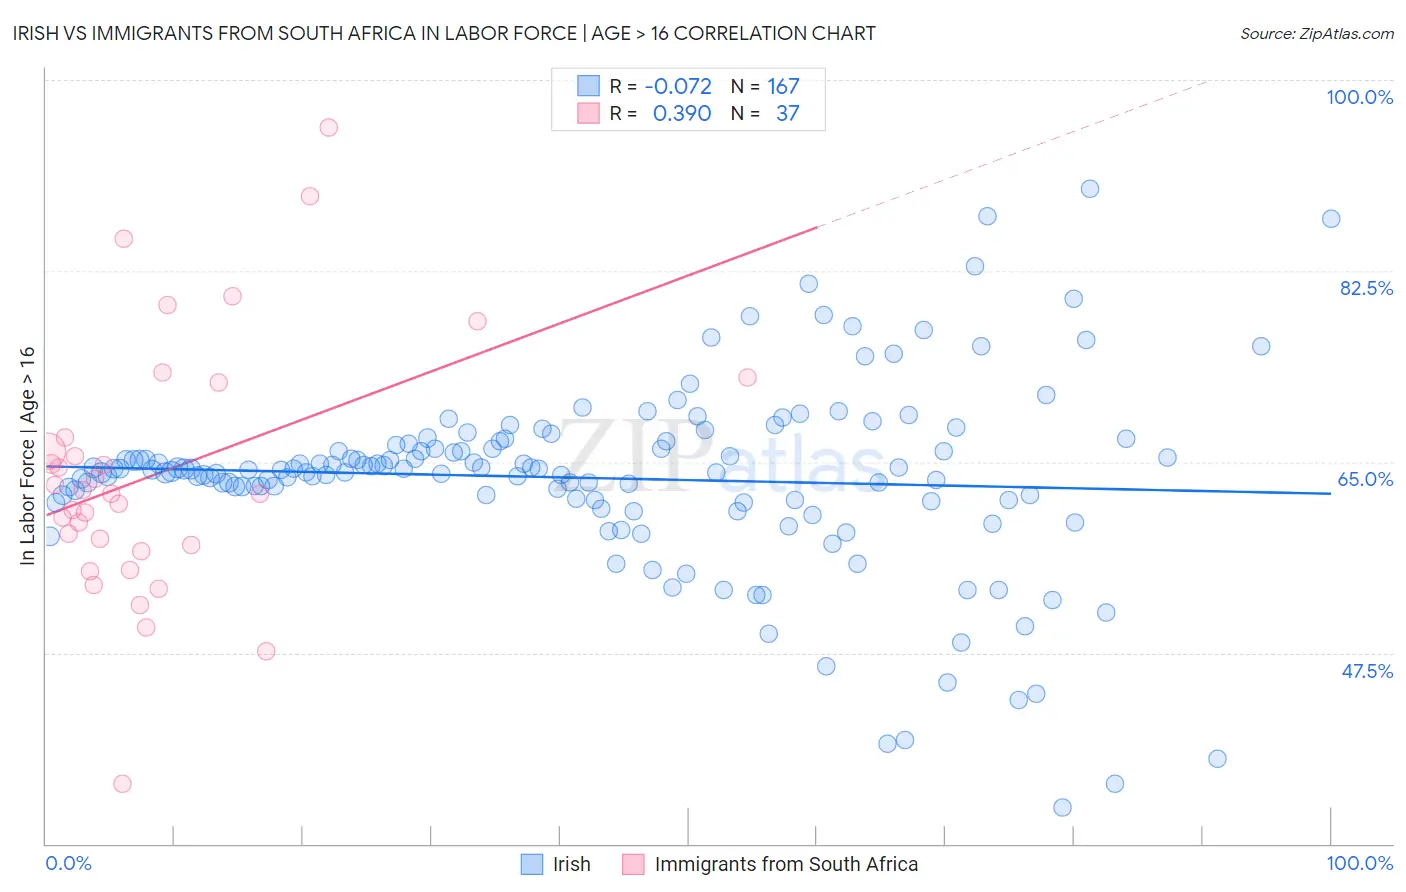 Irish vs Immigrants from South Africa In Labor Force | Age > 16